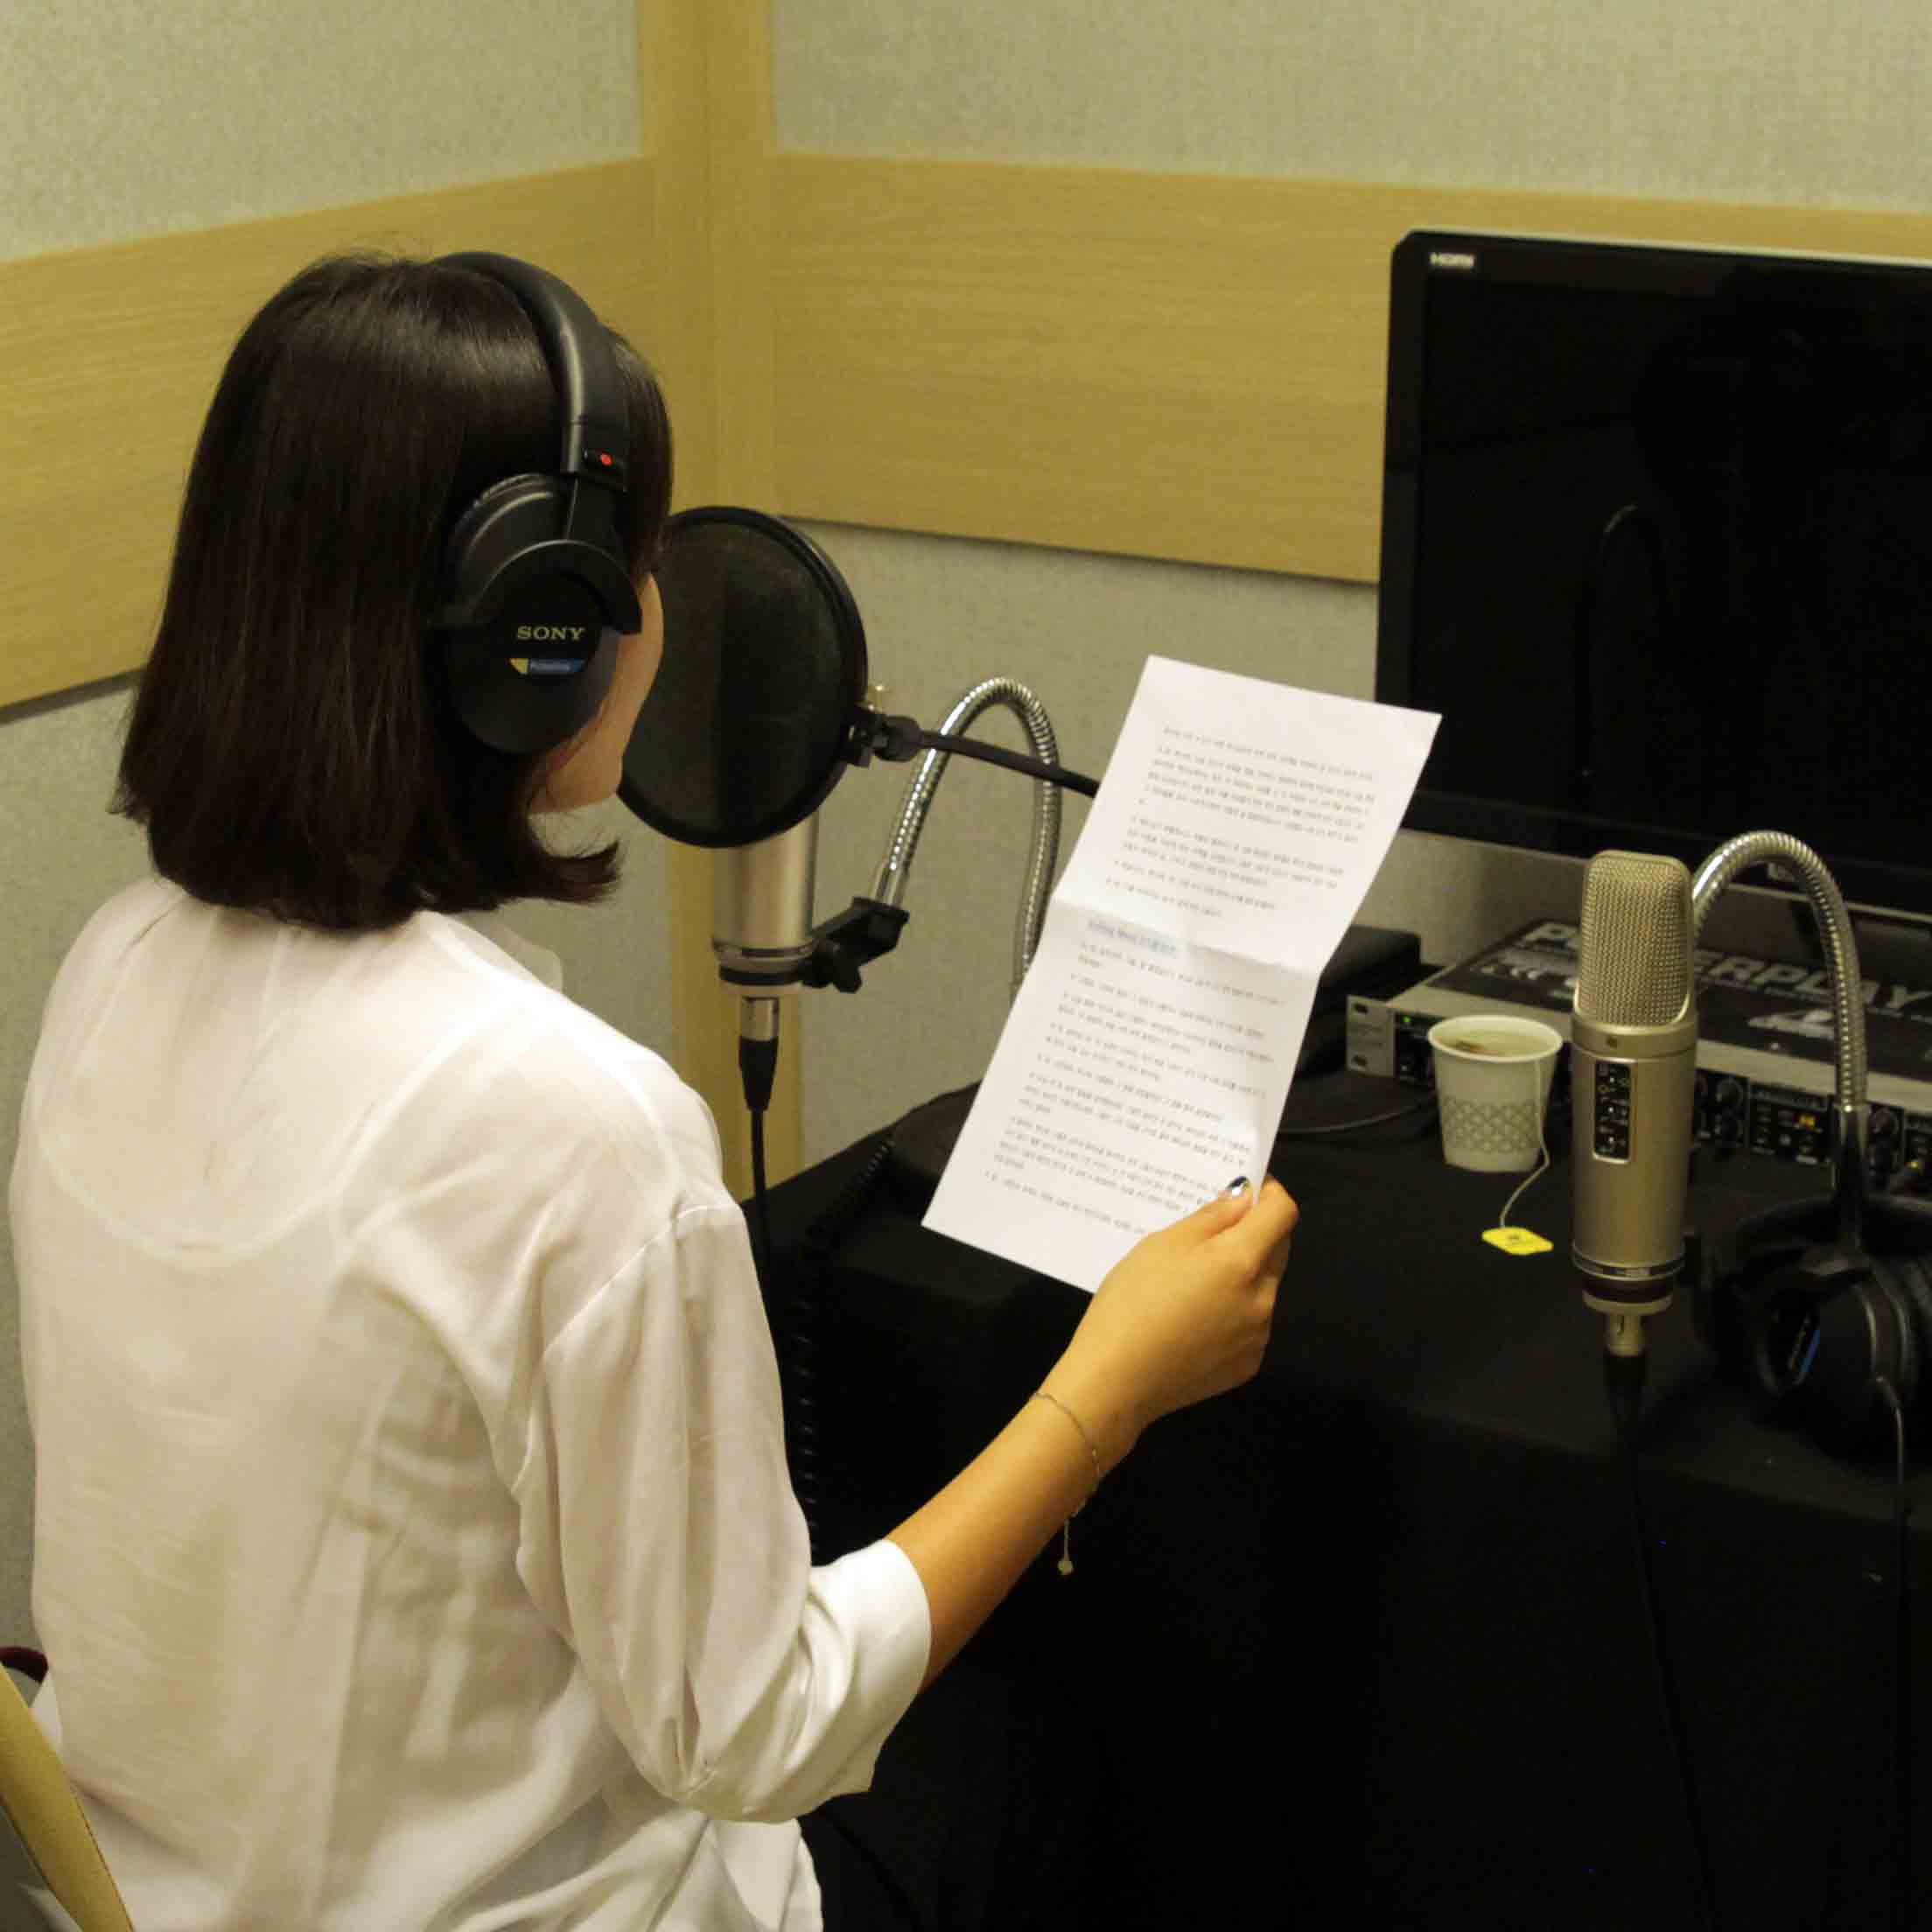 North Korean defectors also broadcasts messages of truth and and love into North Korea over the radio.